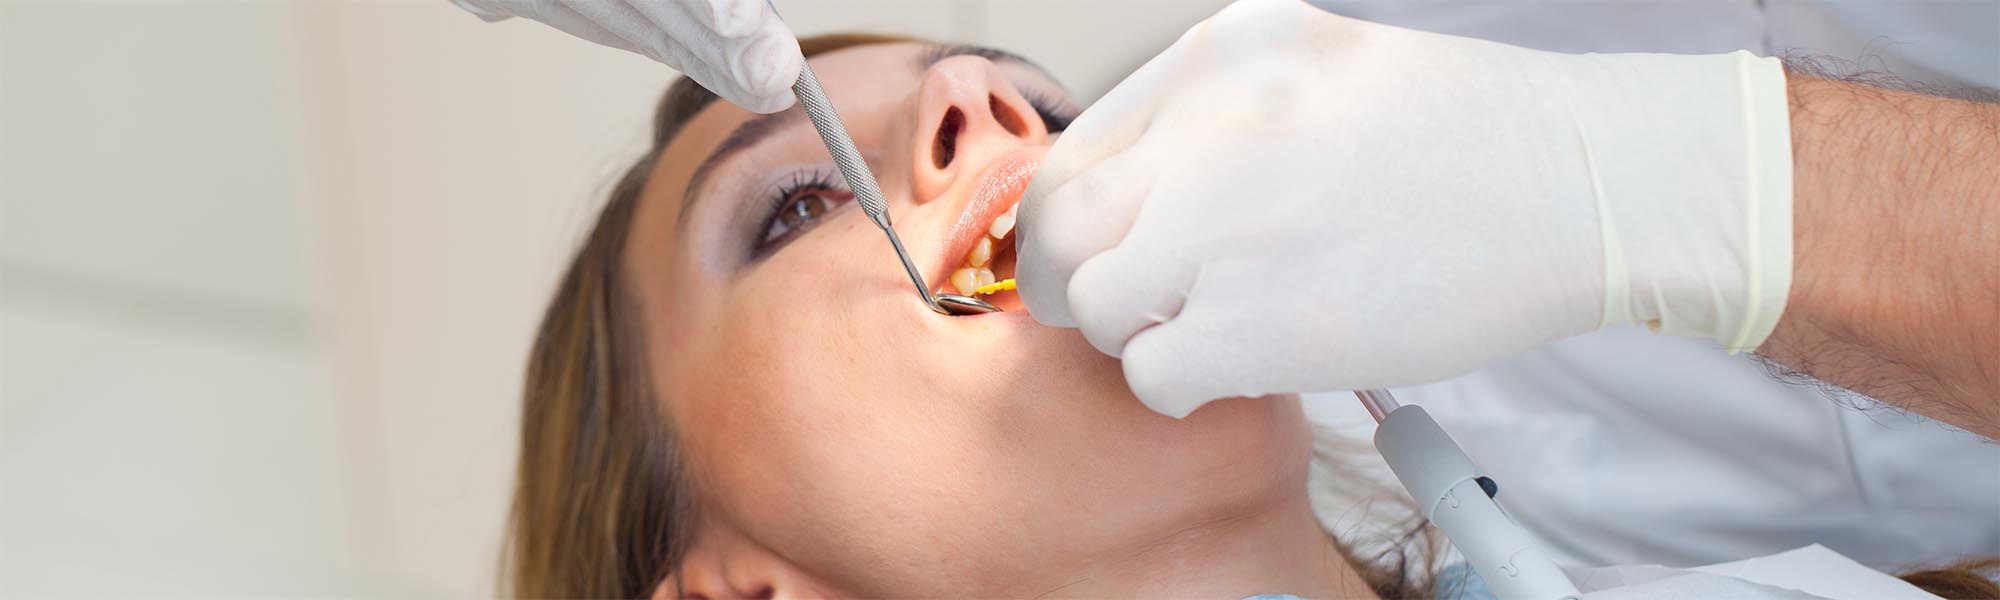 Wisdom Tooth Removal in Downey CA